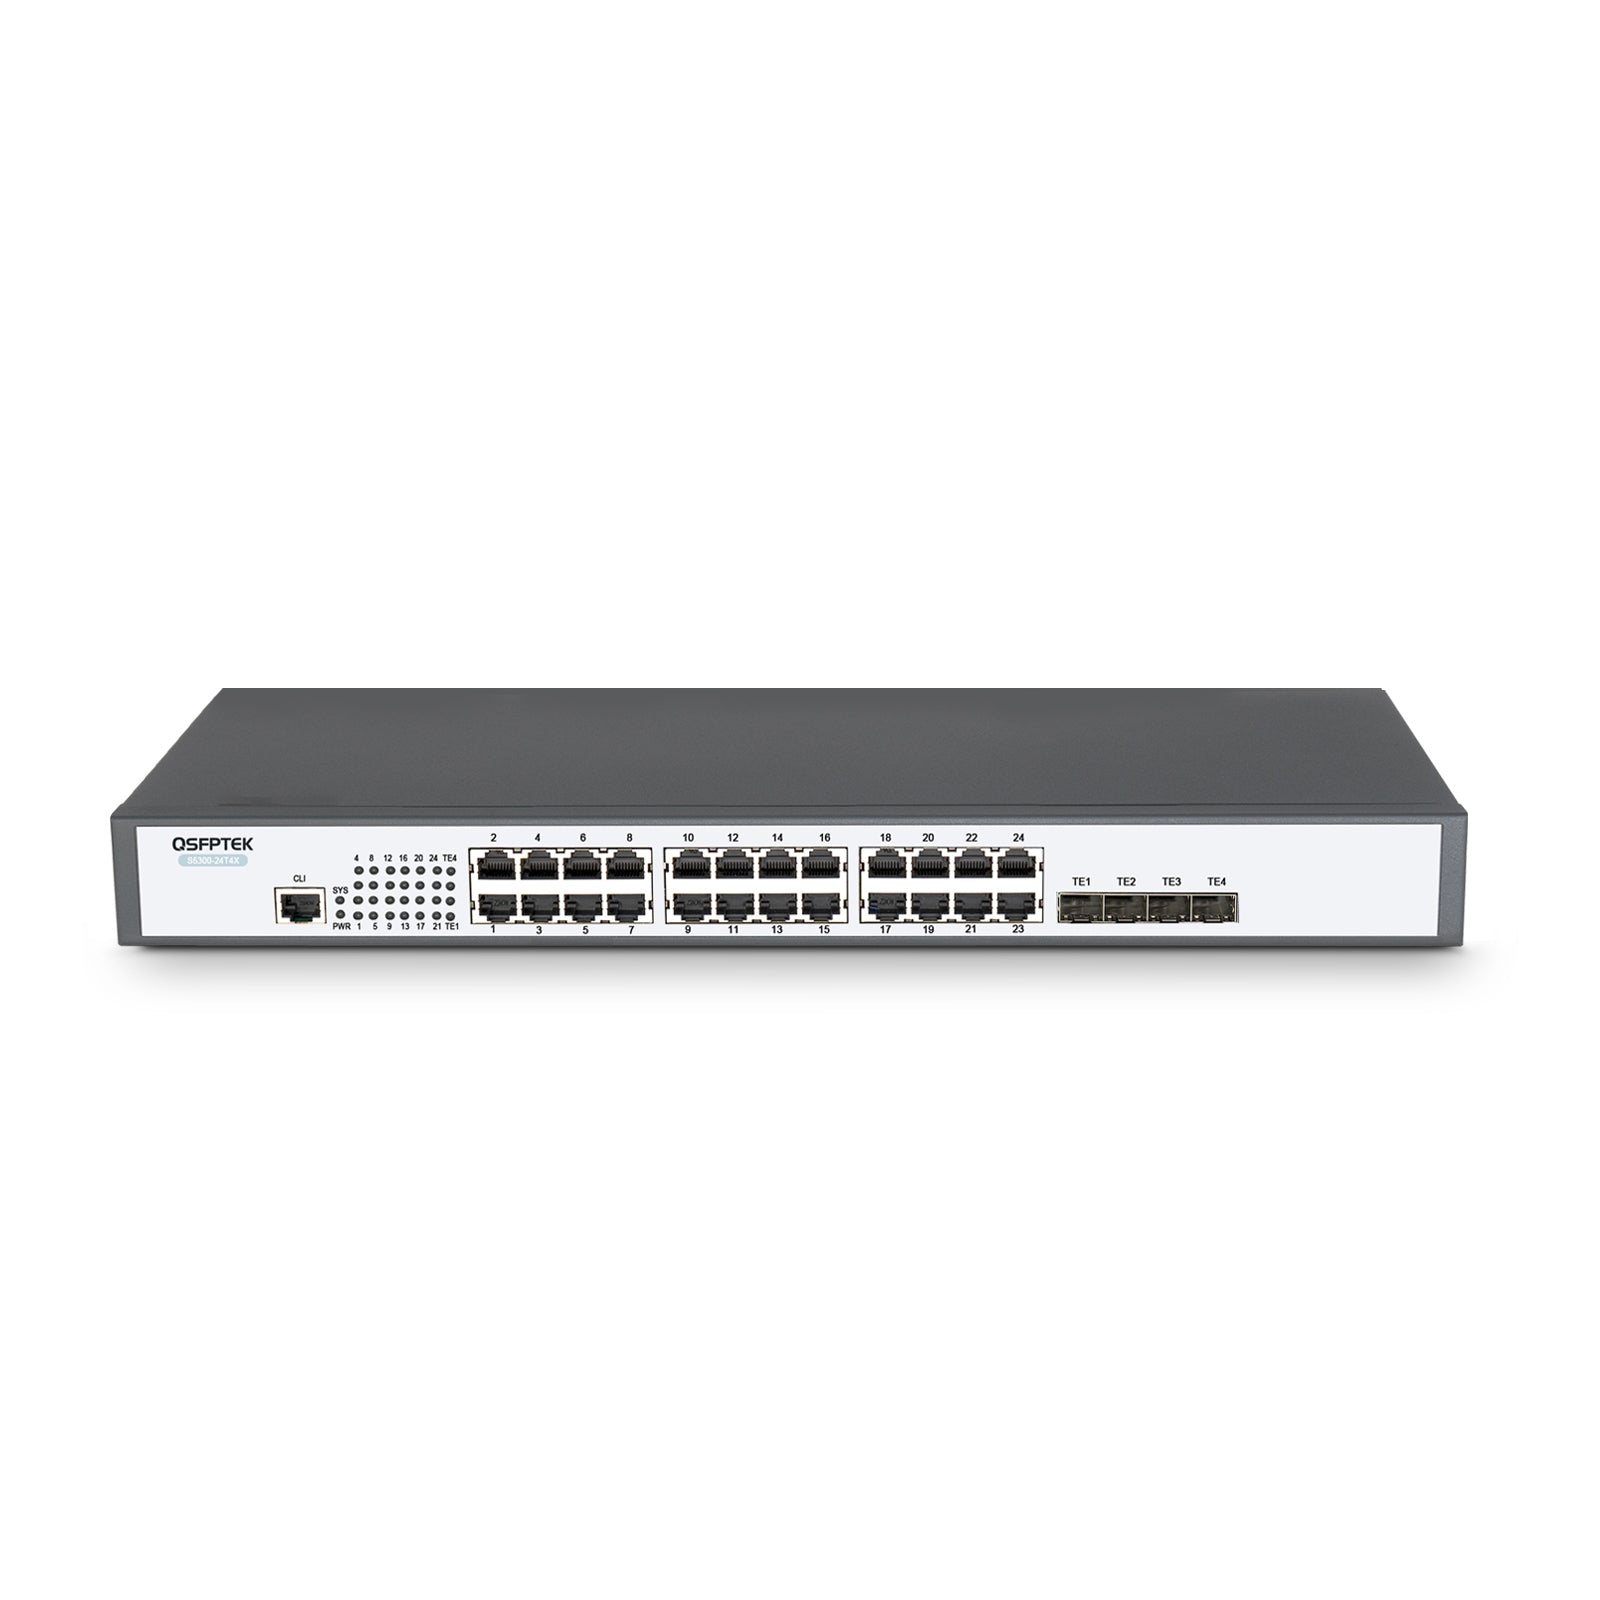 S5300-24T4X, 24-Port Ethernet L2+ Access Switch, 24x GE RJ45 Ports with 4x 10GE SFP+ Uplinks, Stackable Switch, Fanless